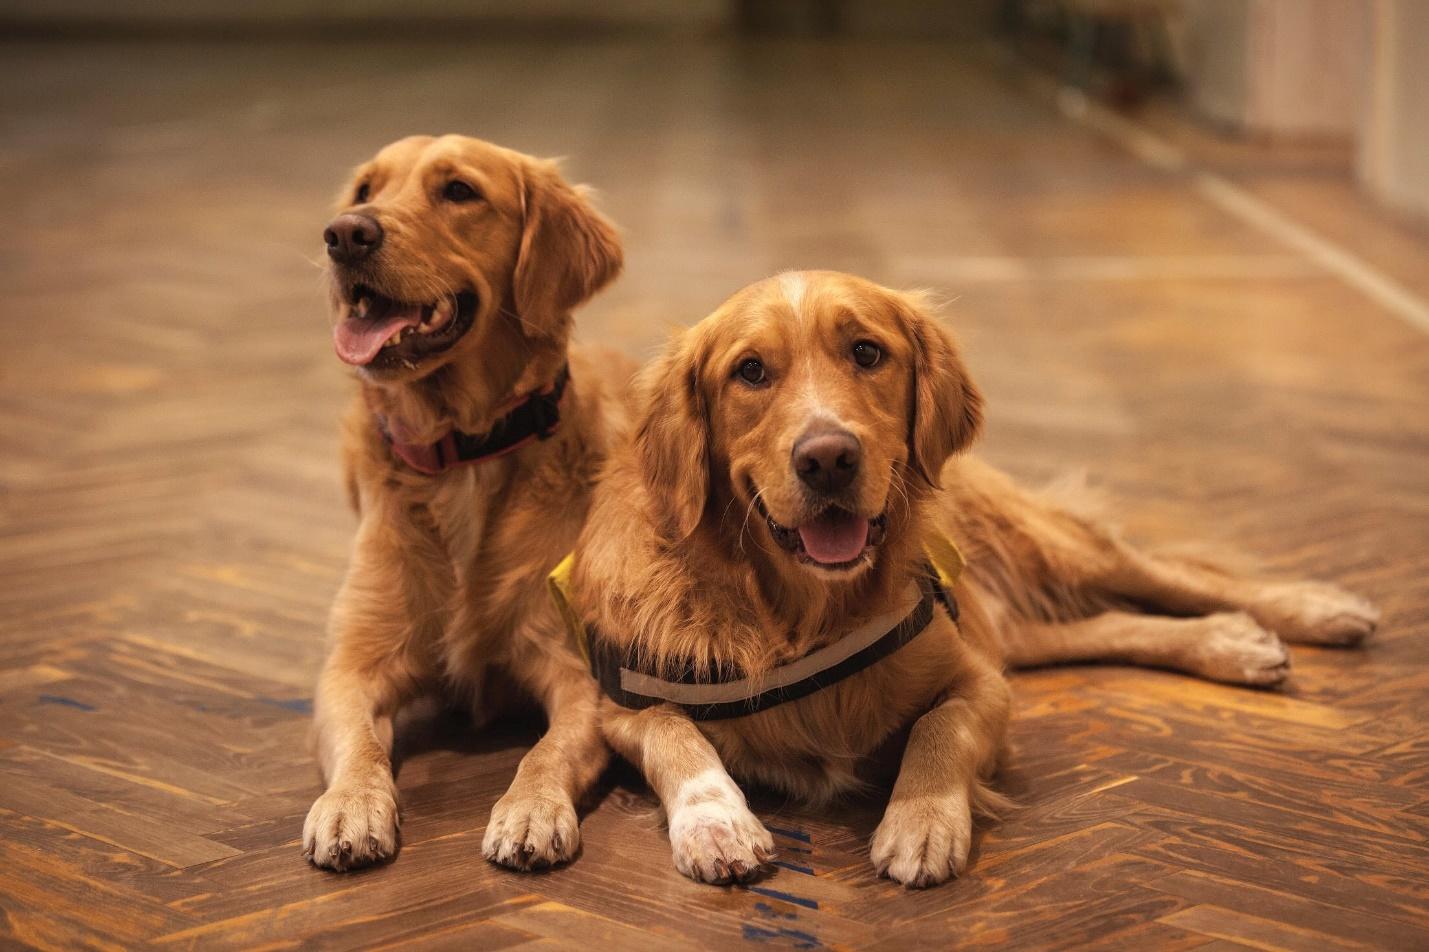 Two dogs sitting on a hardwood floor.